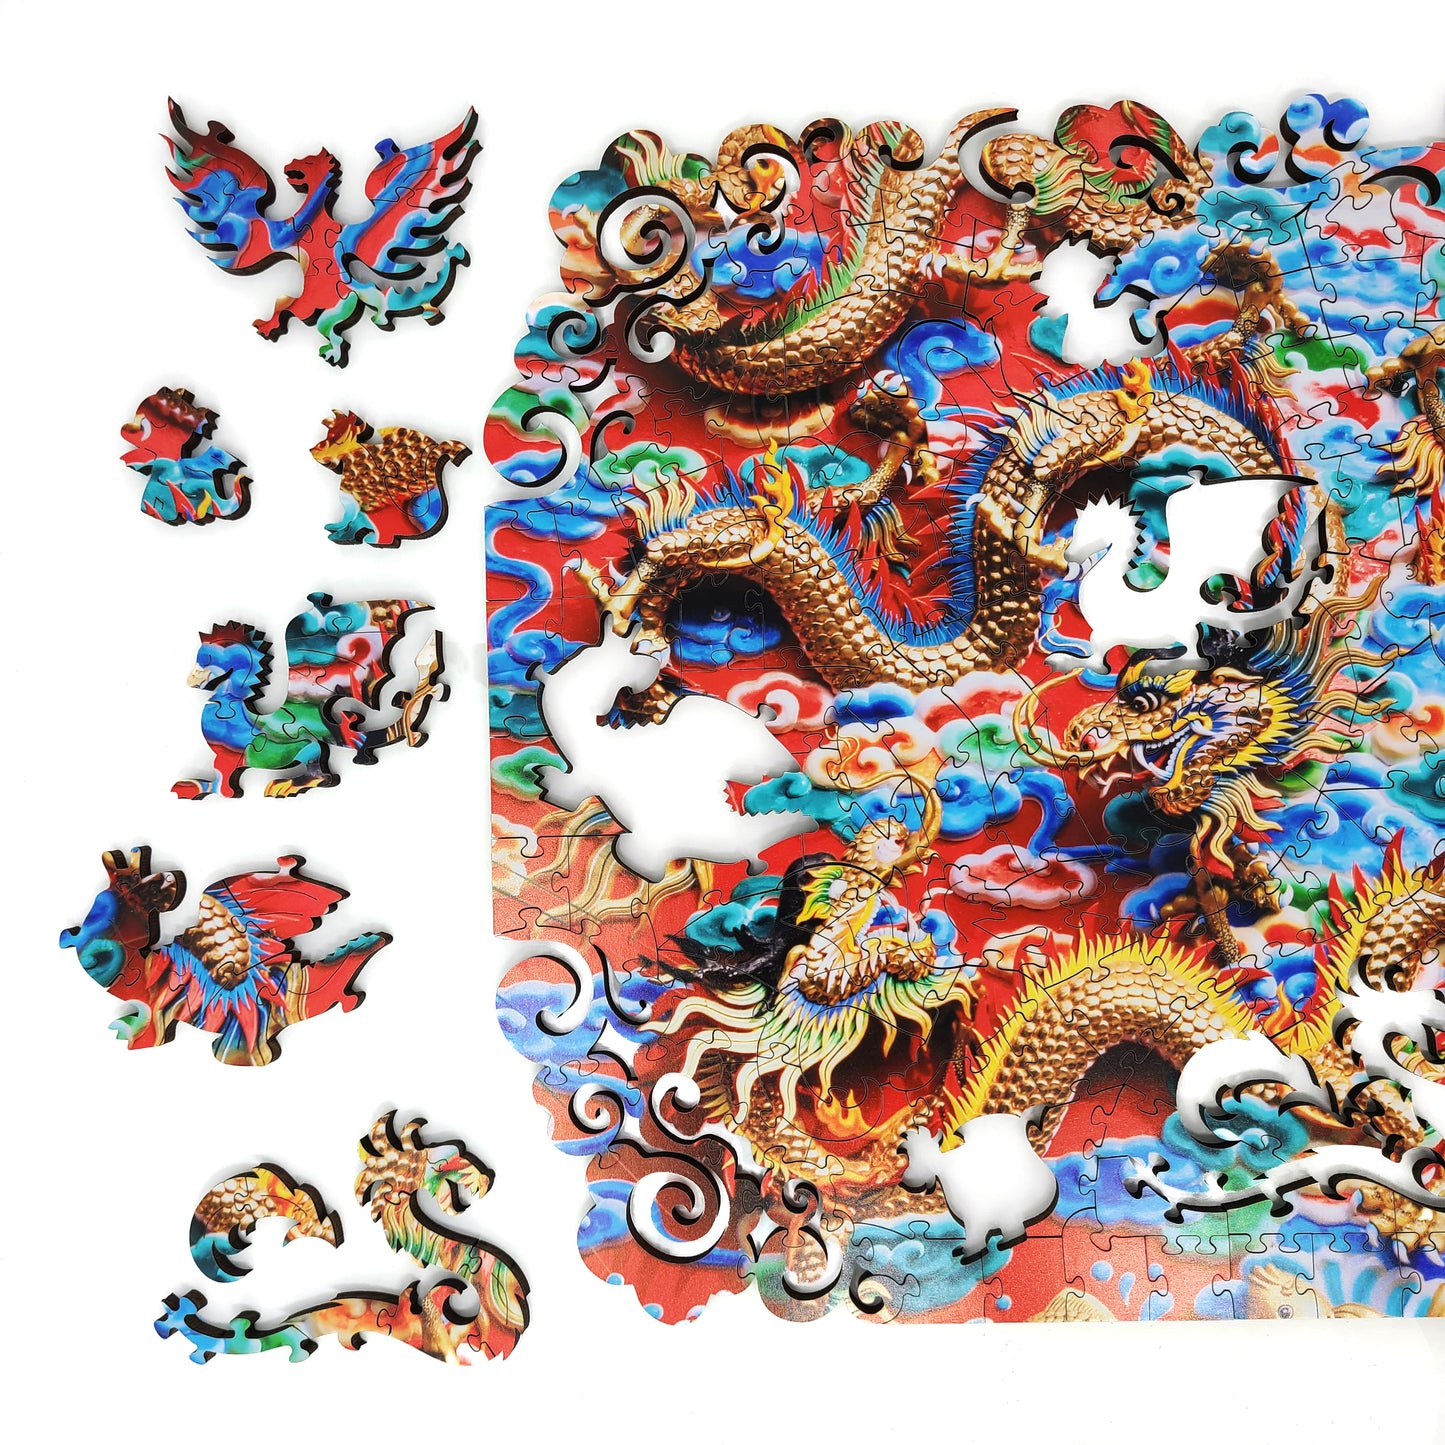 Wooden Jigsaw Puzzle with Uniquely Shaped Pieces for Adults - 290 Pieces - Mystery of The Golden Dragon